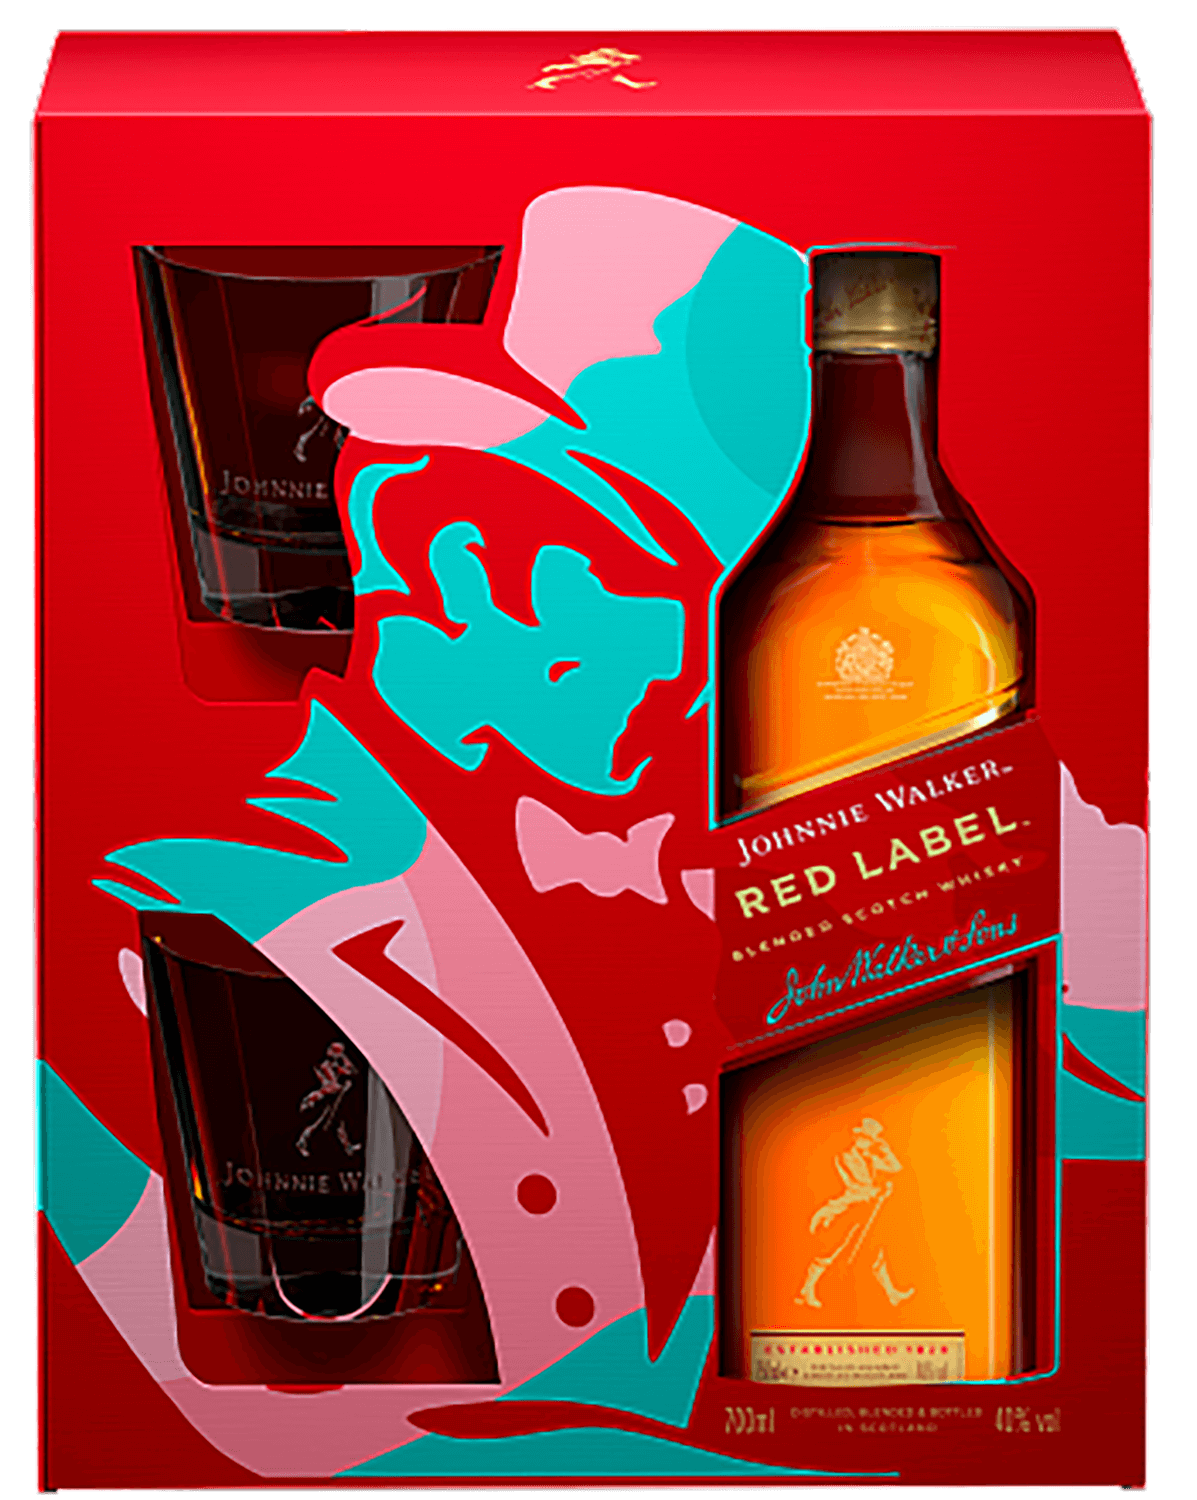 Johnnie Walker Red Label Blended Scotch Whisky (gift box with 2 glasses) johnnie walker 18 y o blended scotch whisky gift box